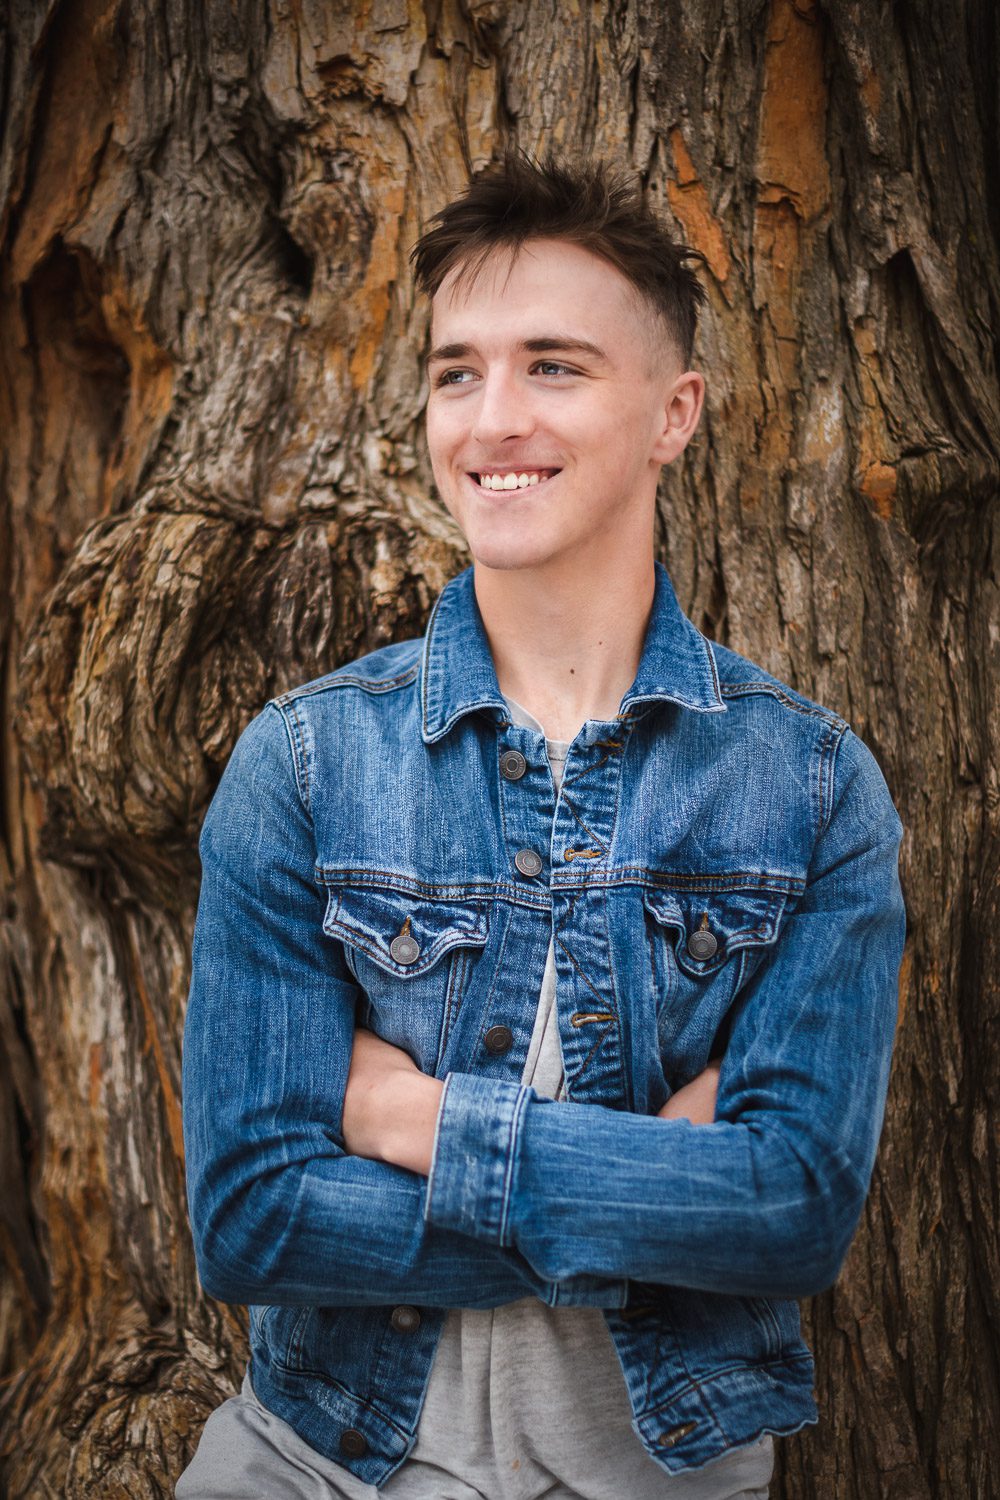 Battle High School Senior Will Doolady leans on a tree near Columbia College in Columbia Missouri by Scott Schaefer of Schaefer Photography.  